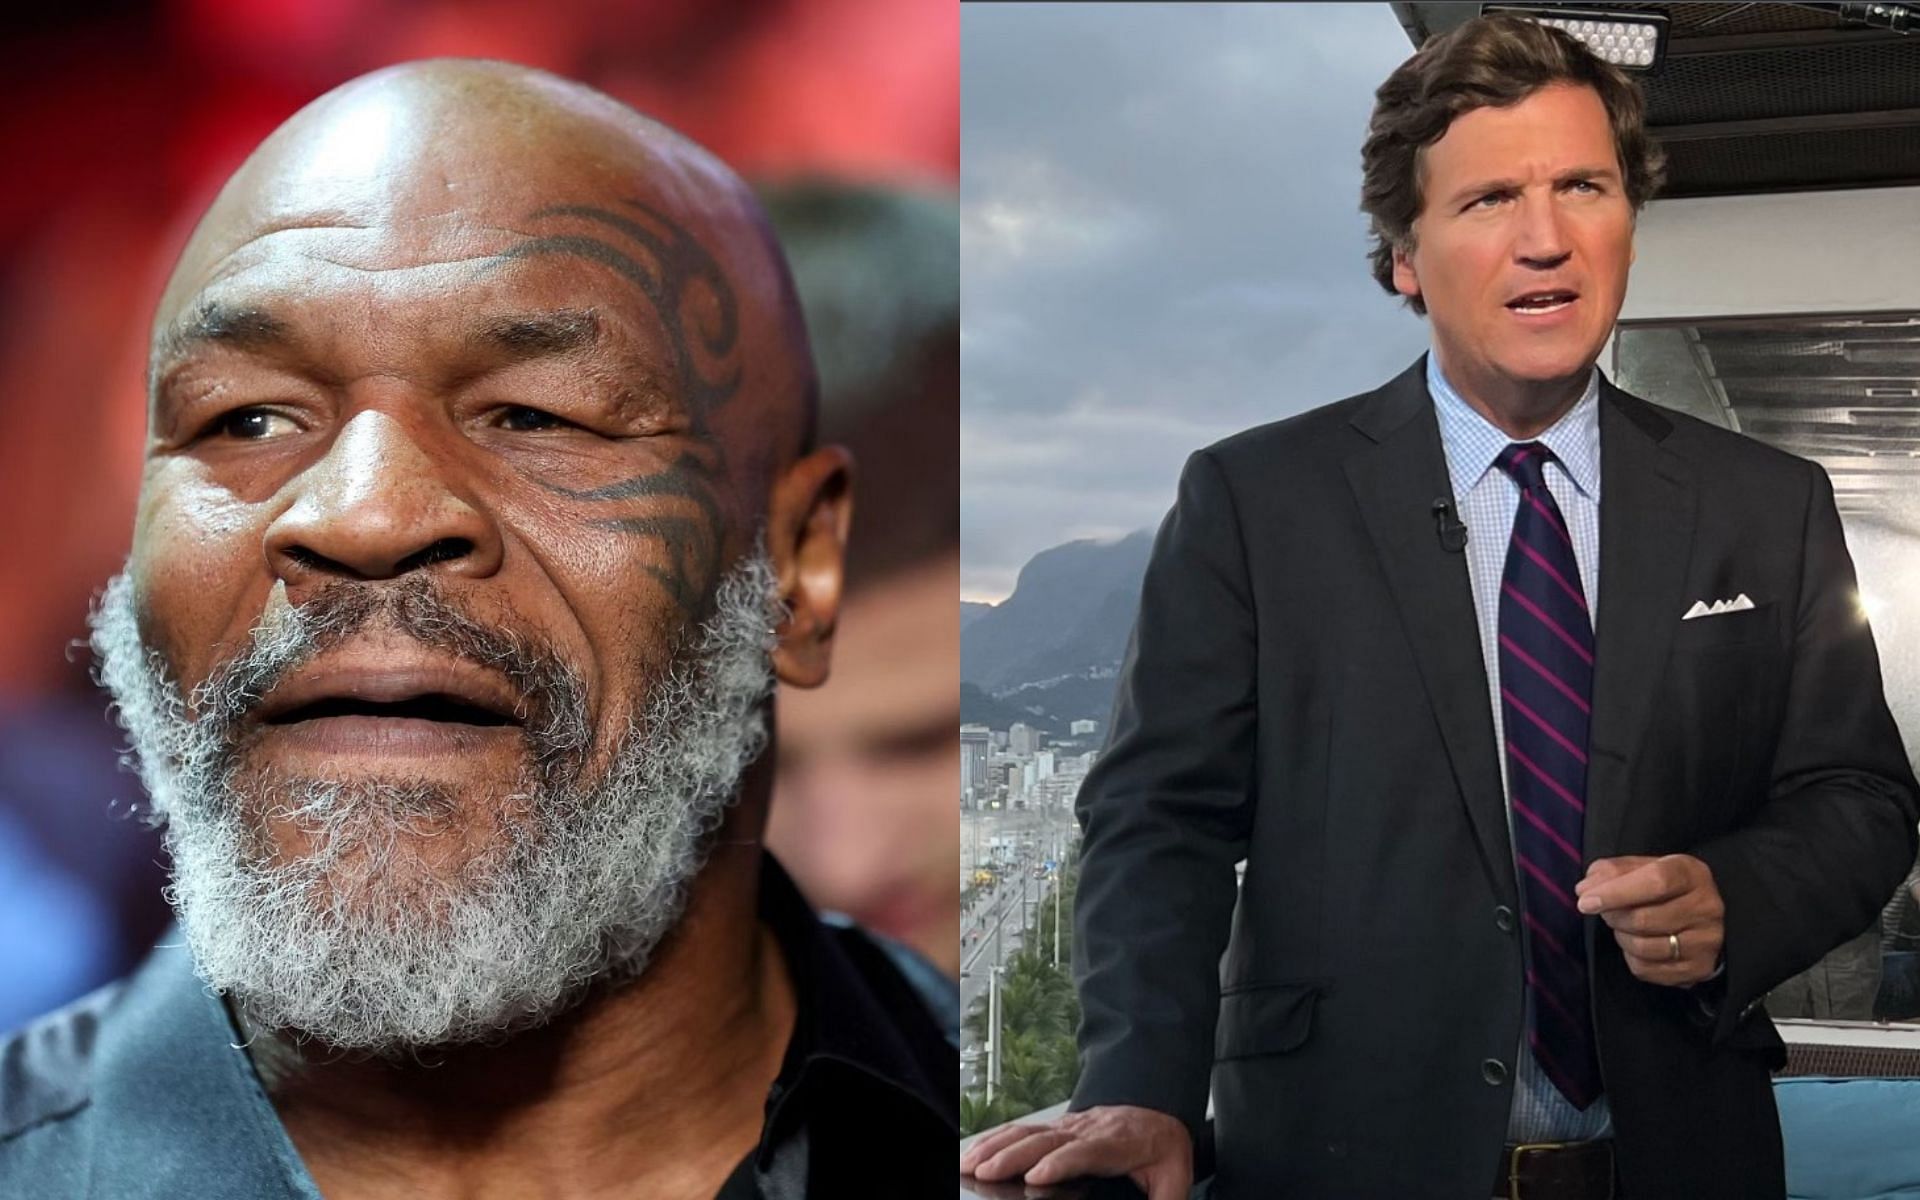 Mike Tyson  (Left) and Tucker Carlson (Right)  (Image credits: Getty Images, @Tuckercarlsontonight Instagram))